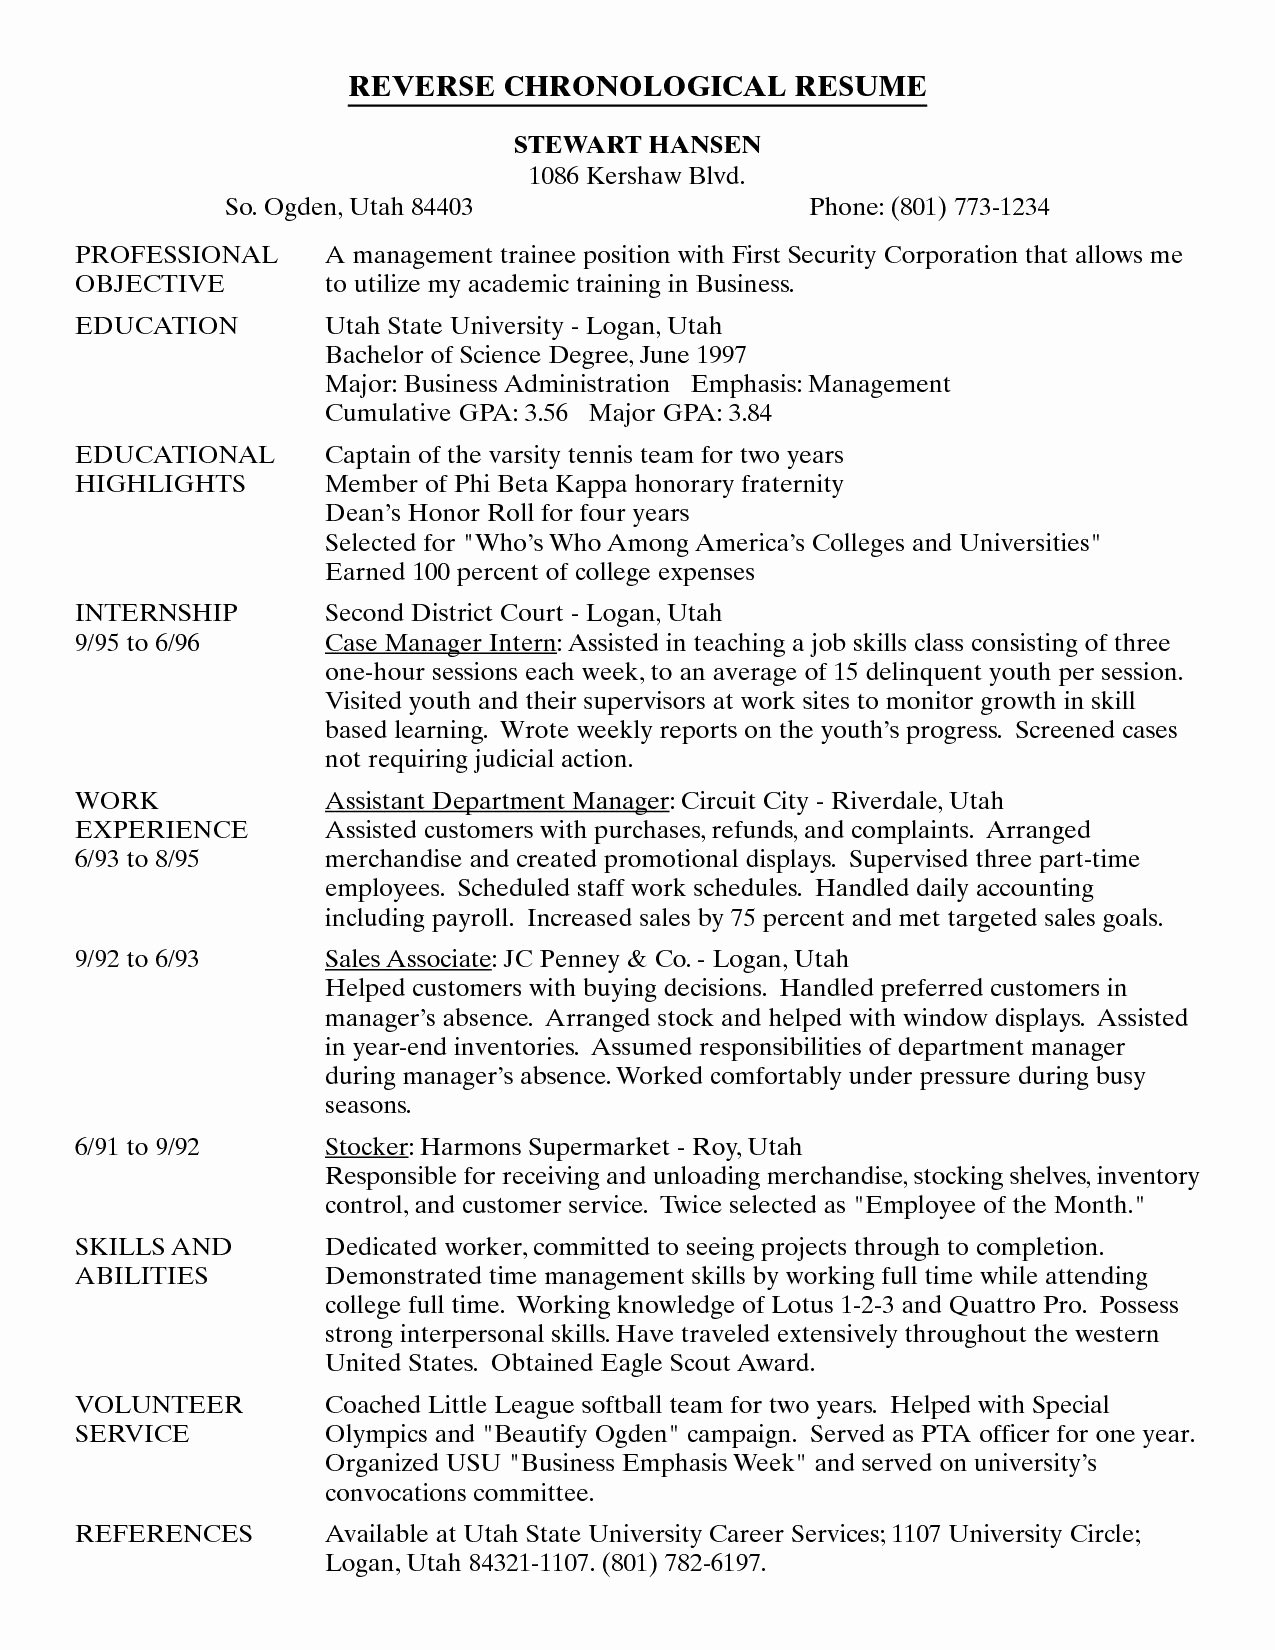 Chronological order Resume Example Dc0364f86 the Reverse